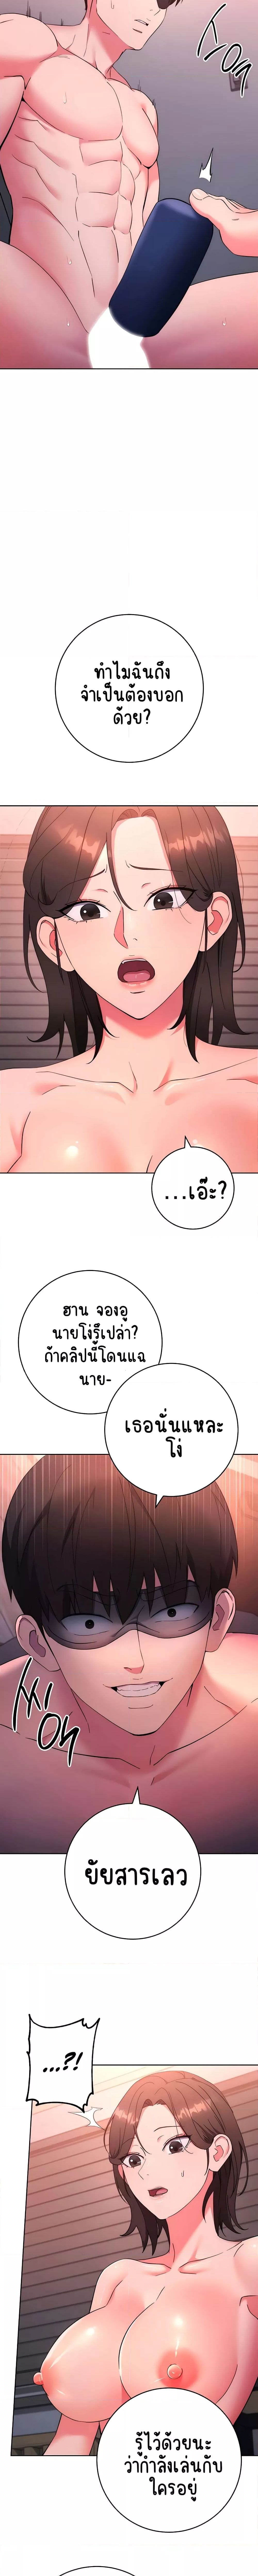 Outsider: The Invisible Man ตอนที่ 9 ภาพ 2